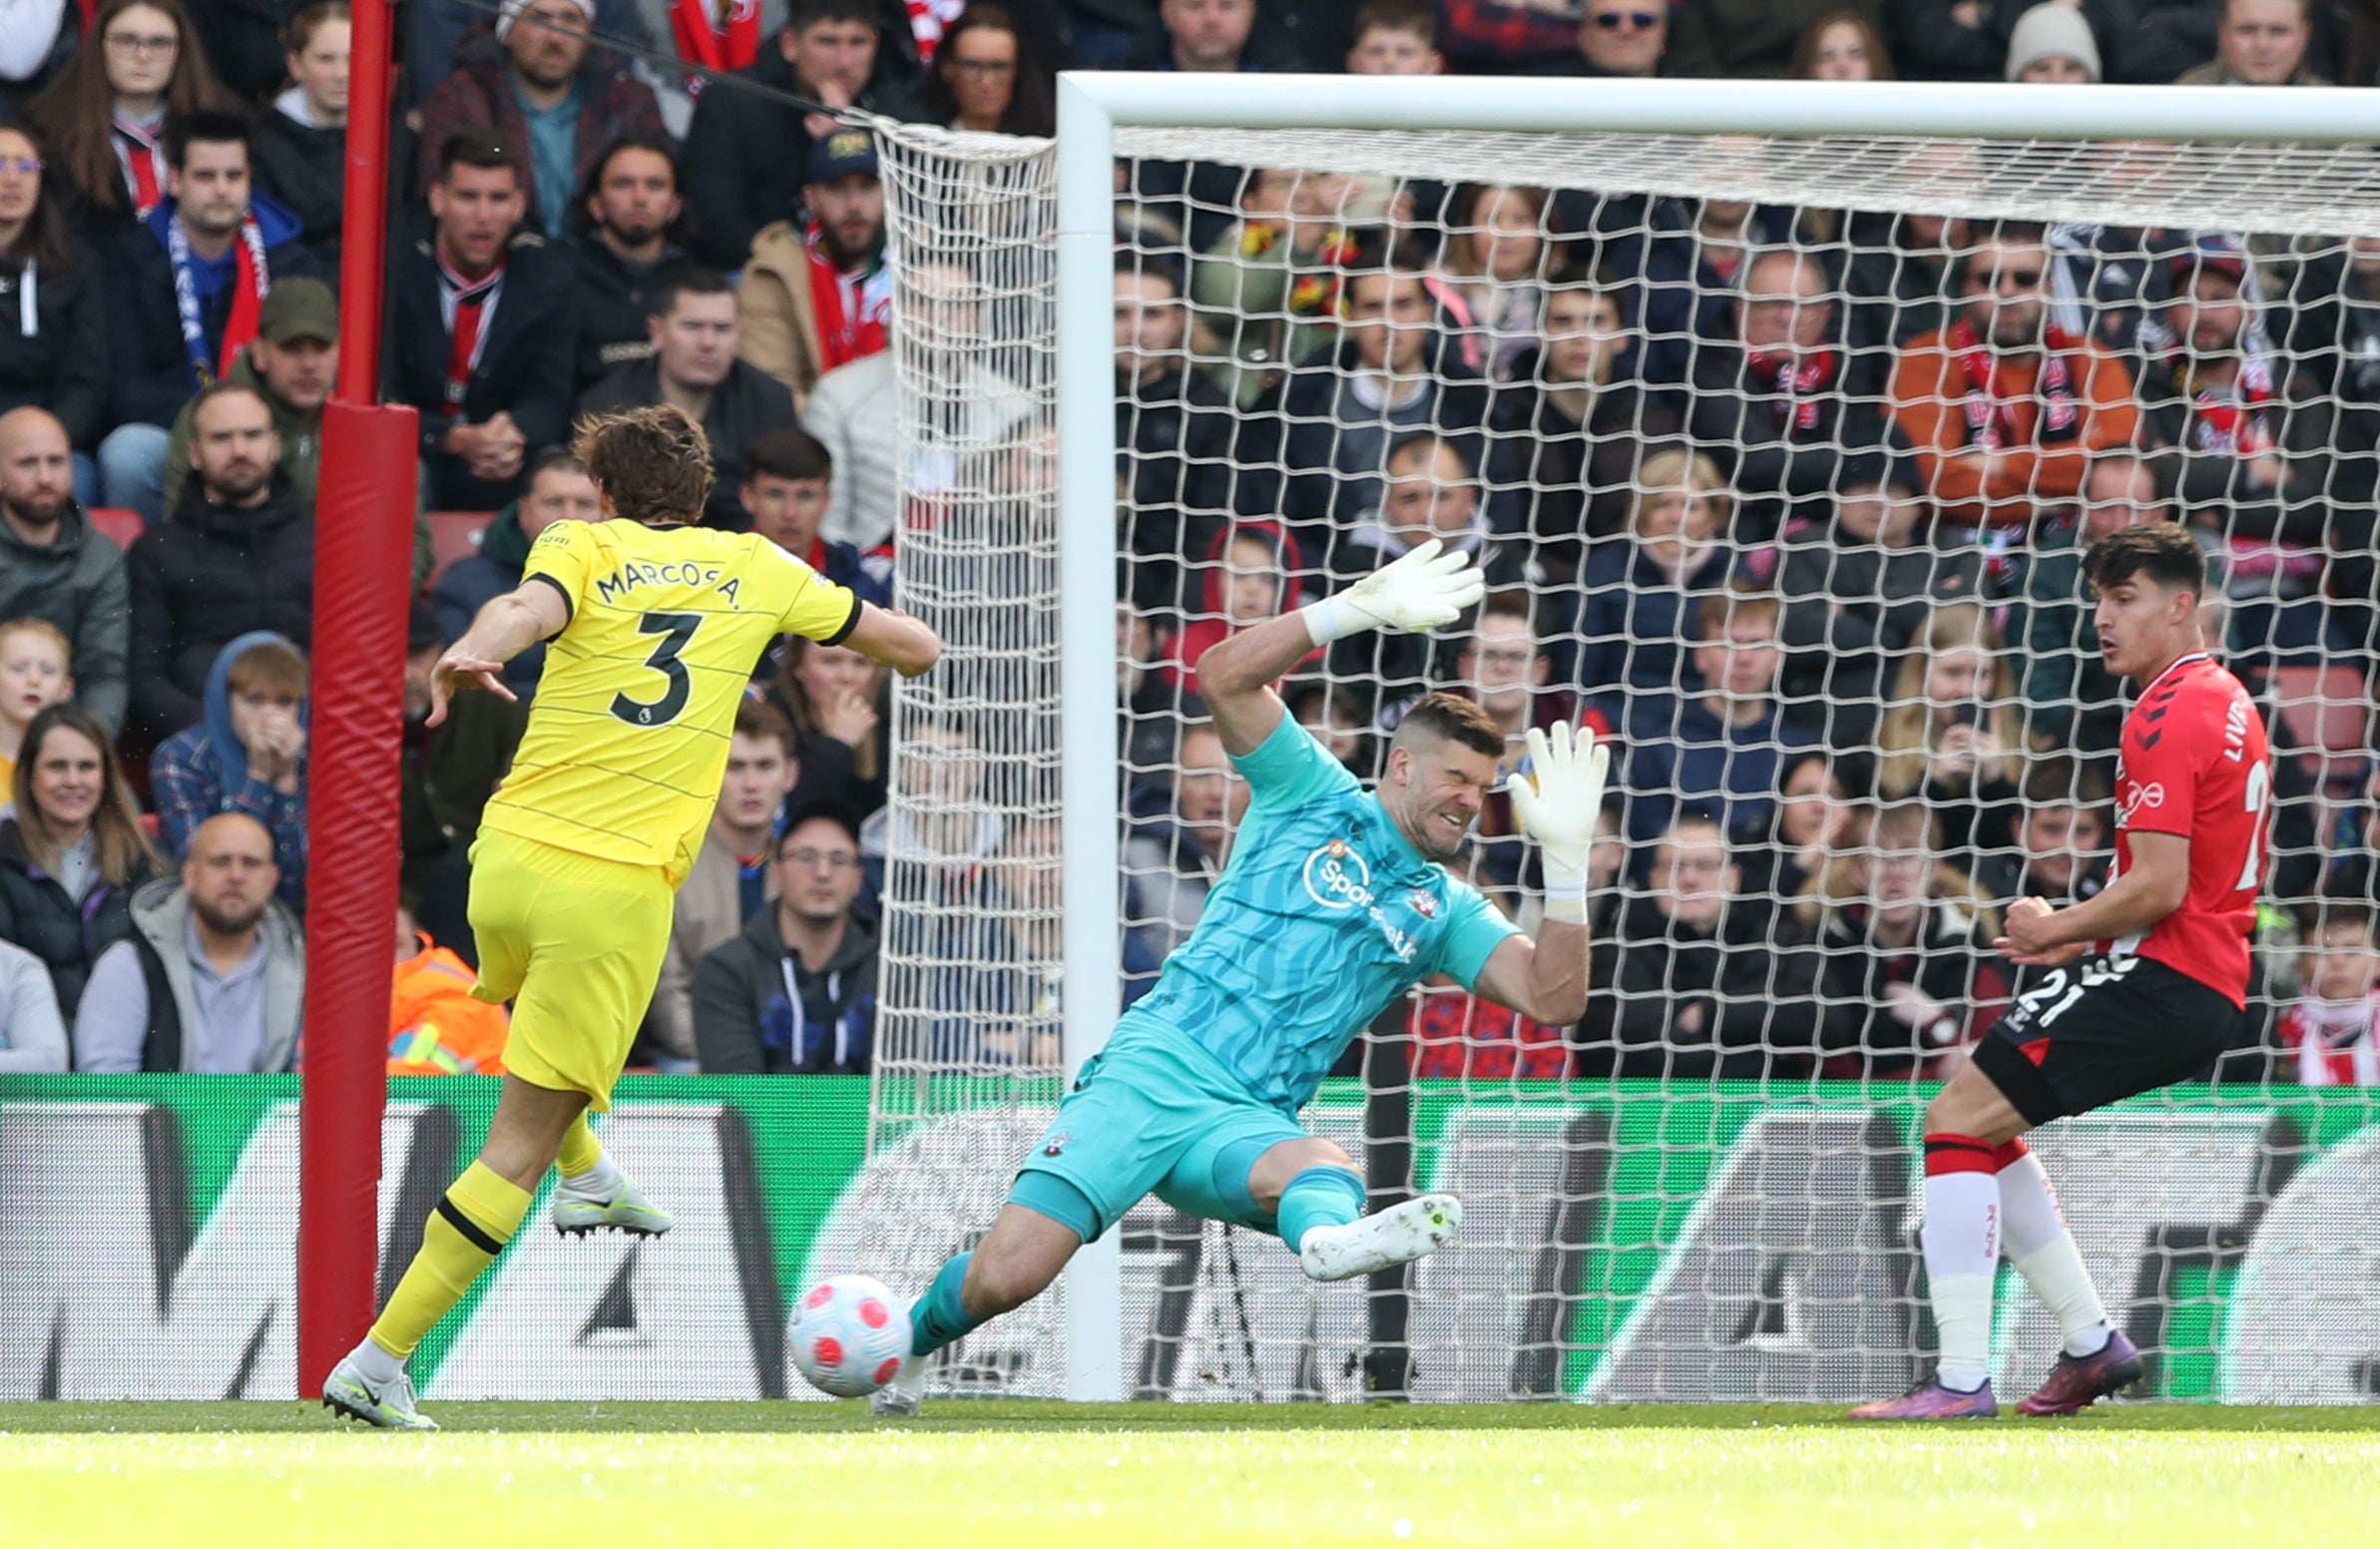 Marcos Alonso fires Chelsea’s first goal as they hit Southampton for six in their Premier League game at St Mary’s Stadium (Kieran Cleeves/PA)